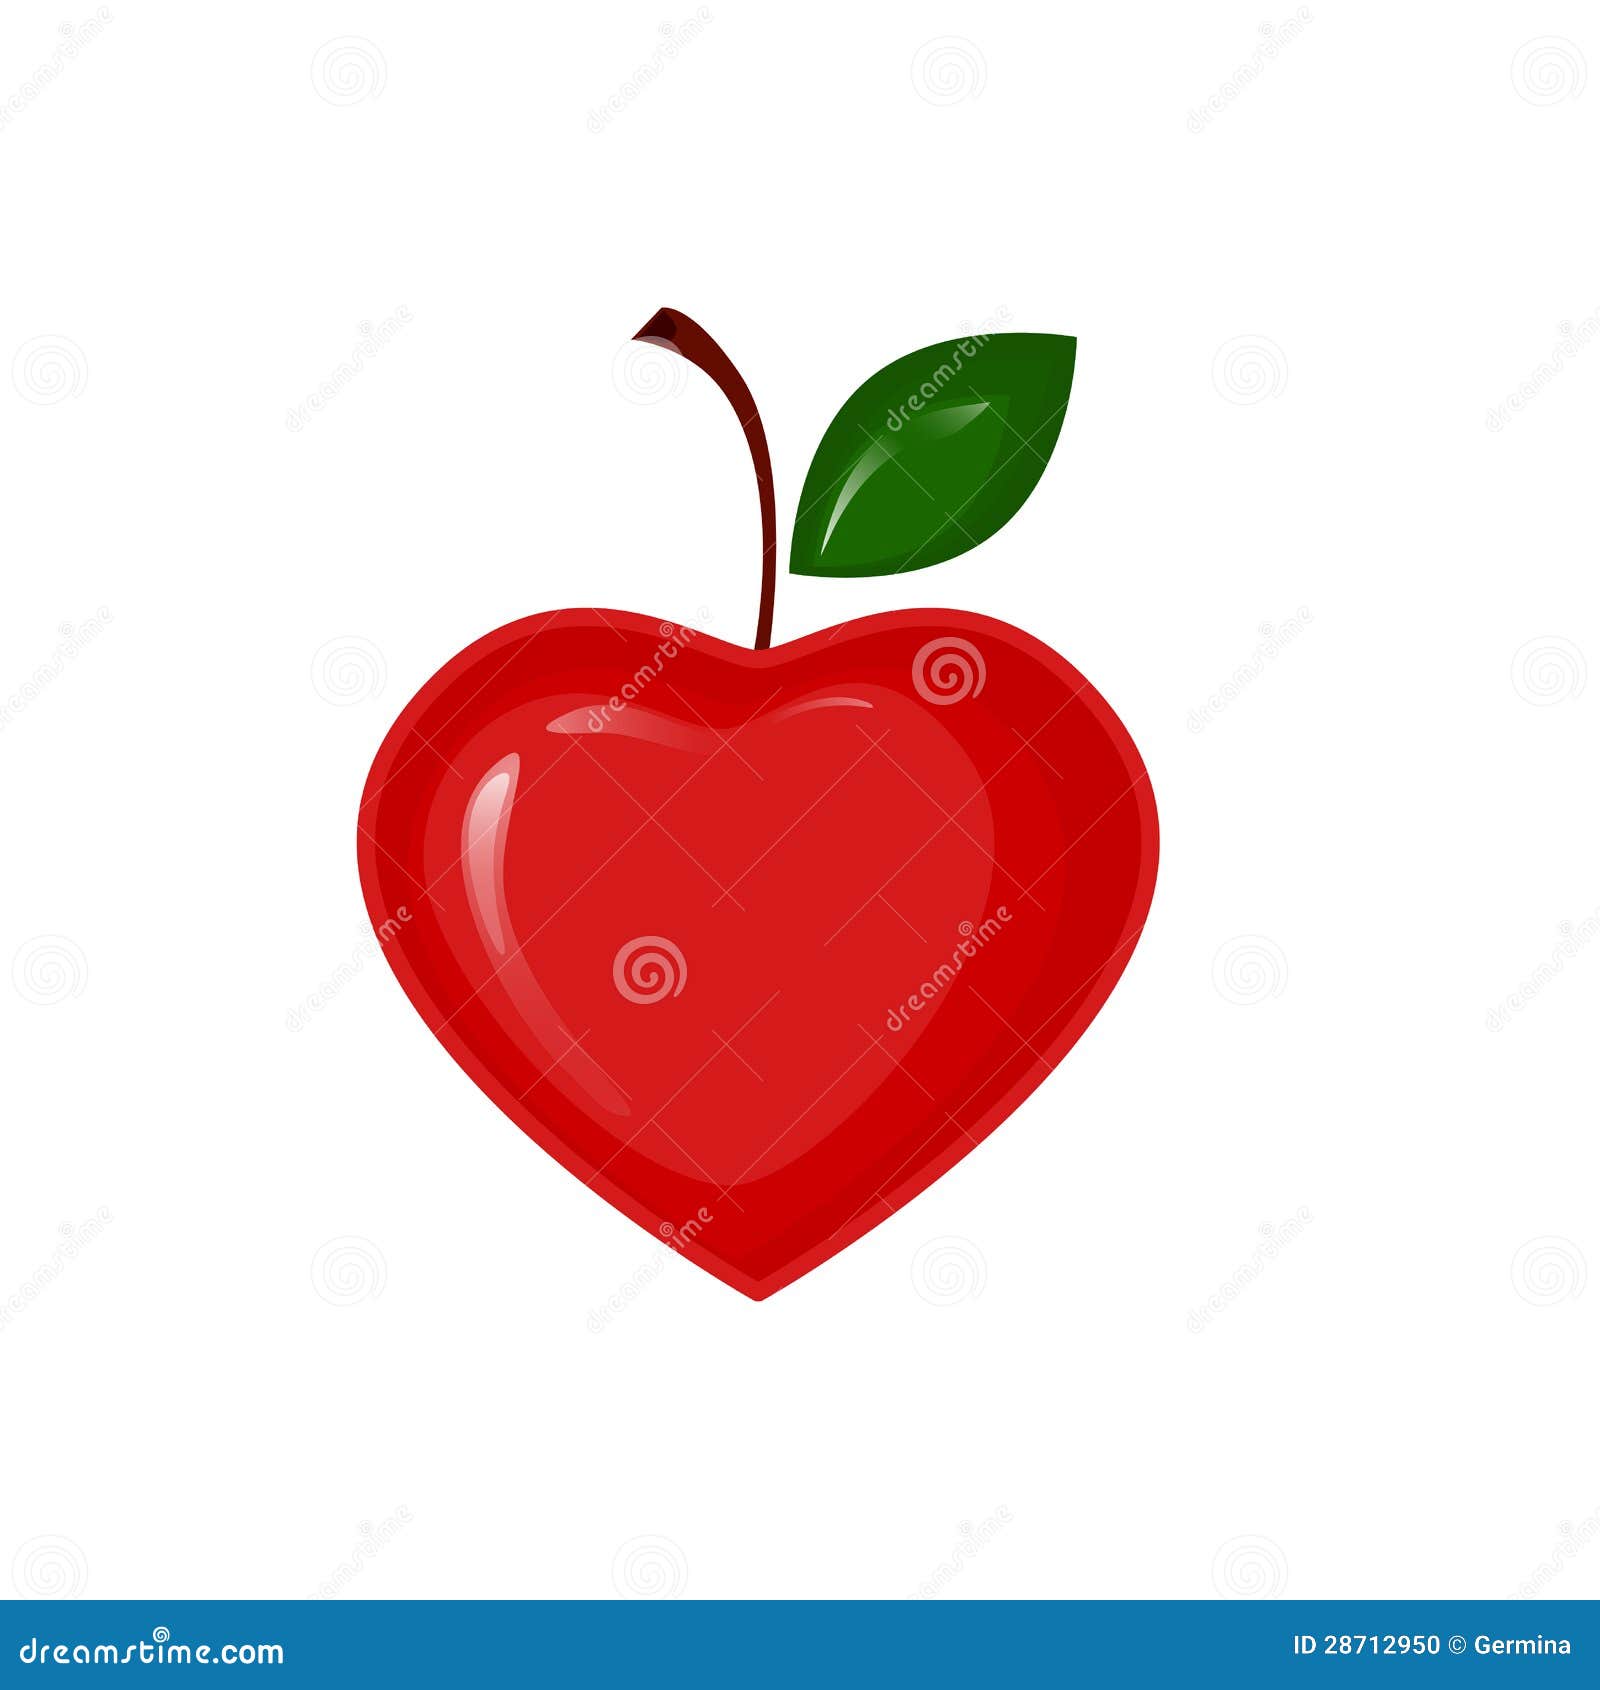 clipart apple with heart - photo #16